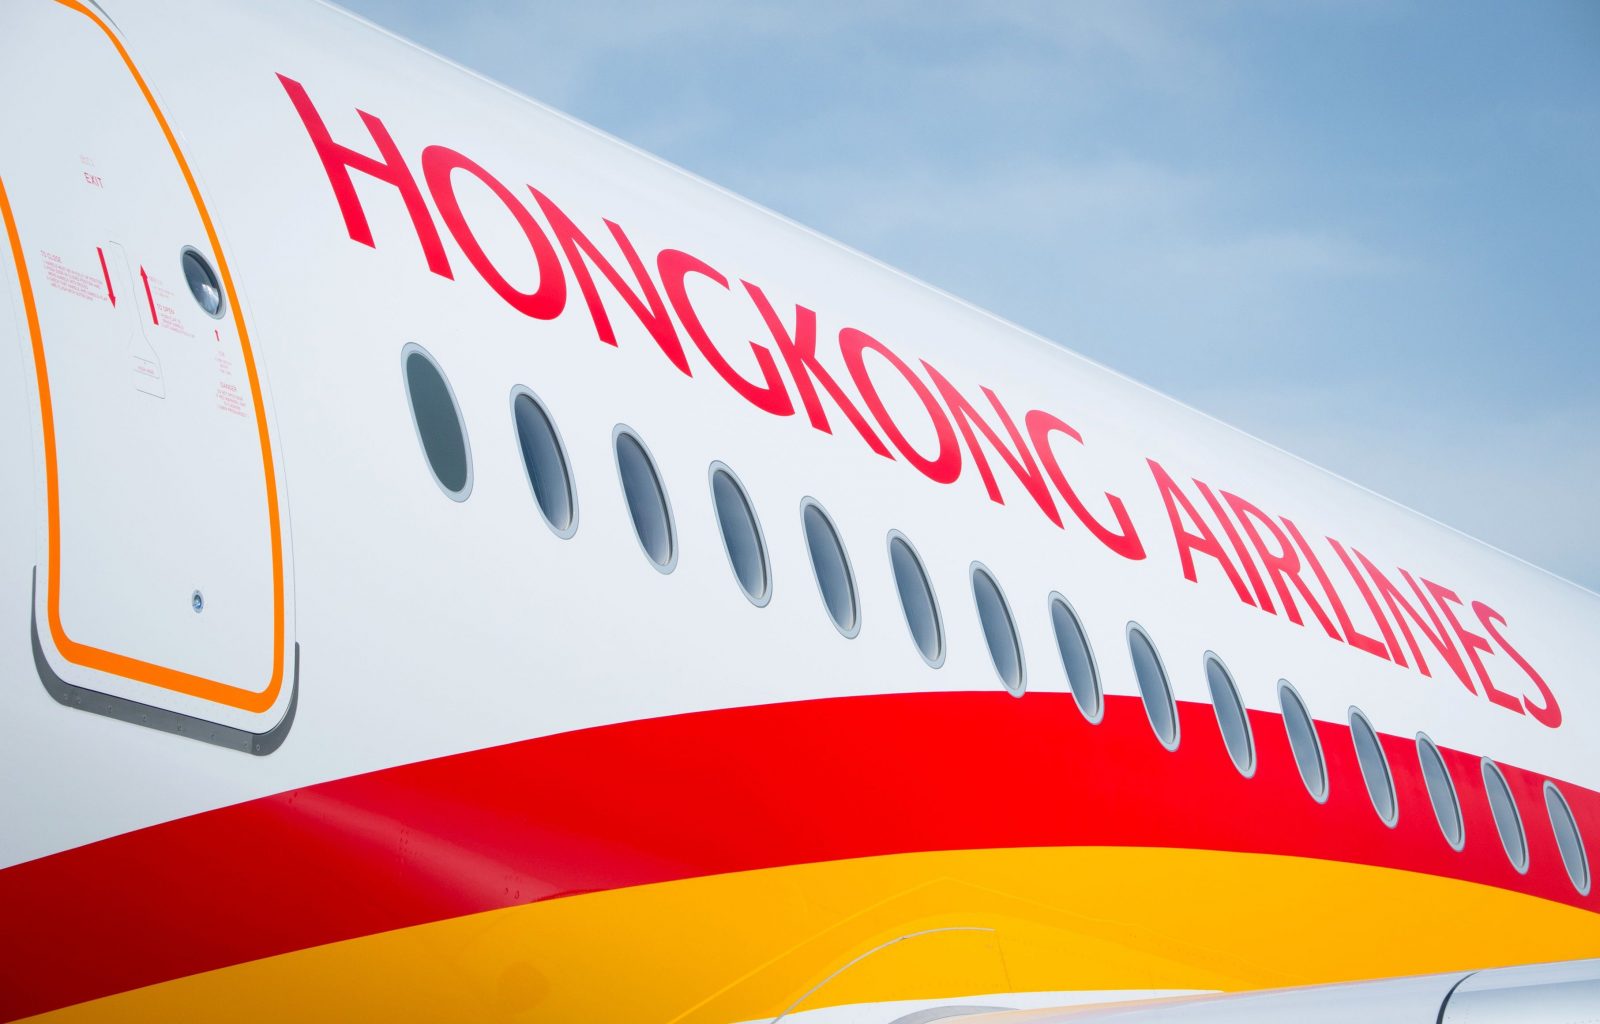 Hong Kong Airlines Threatens to Sue Over Rumours its About to Go Bust